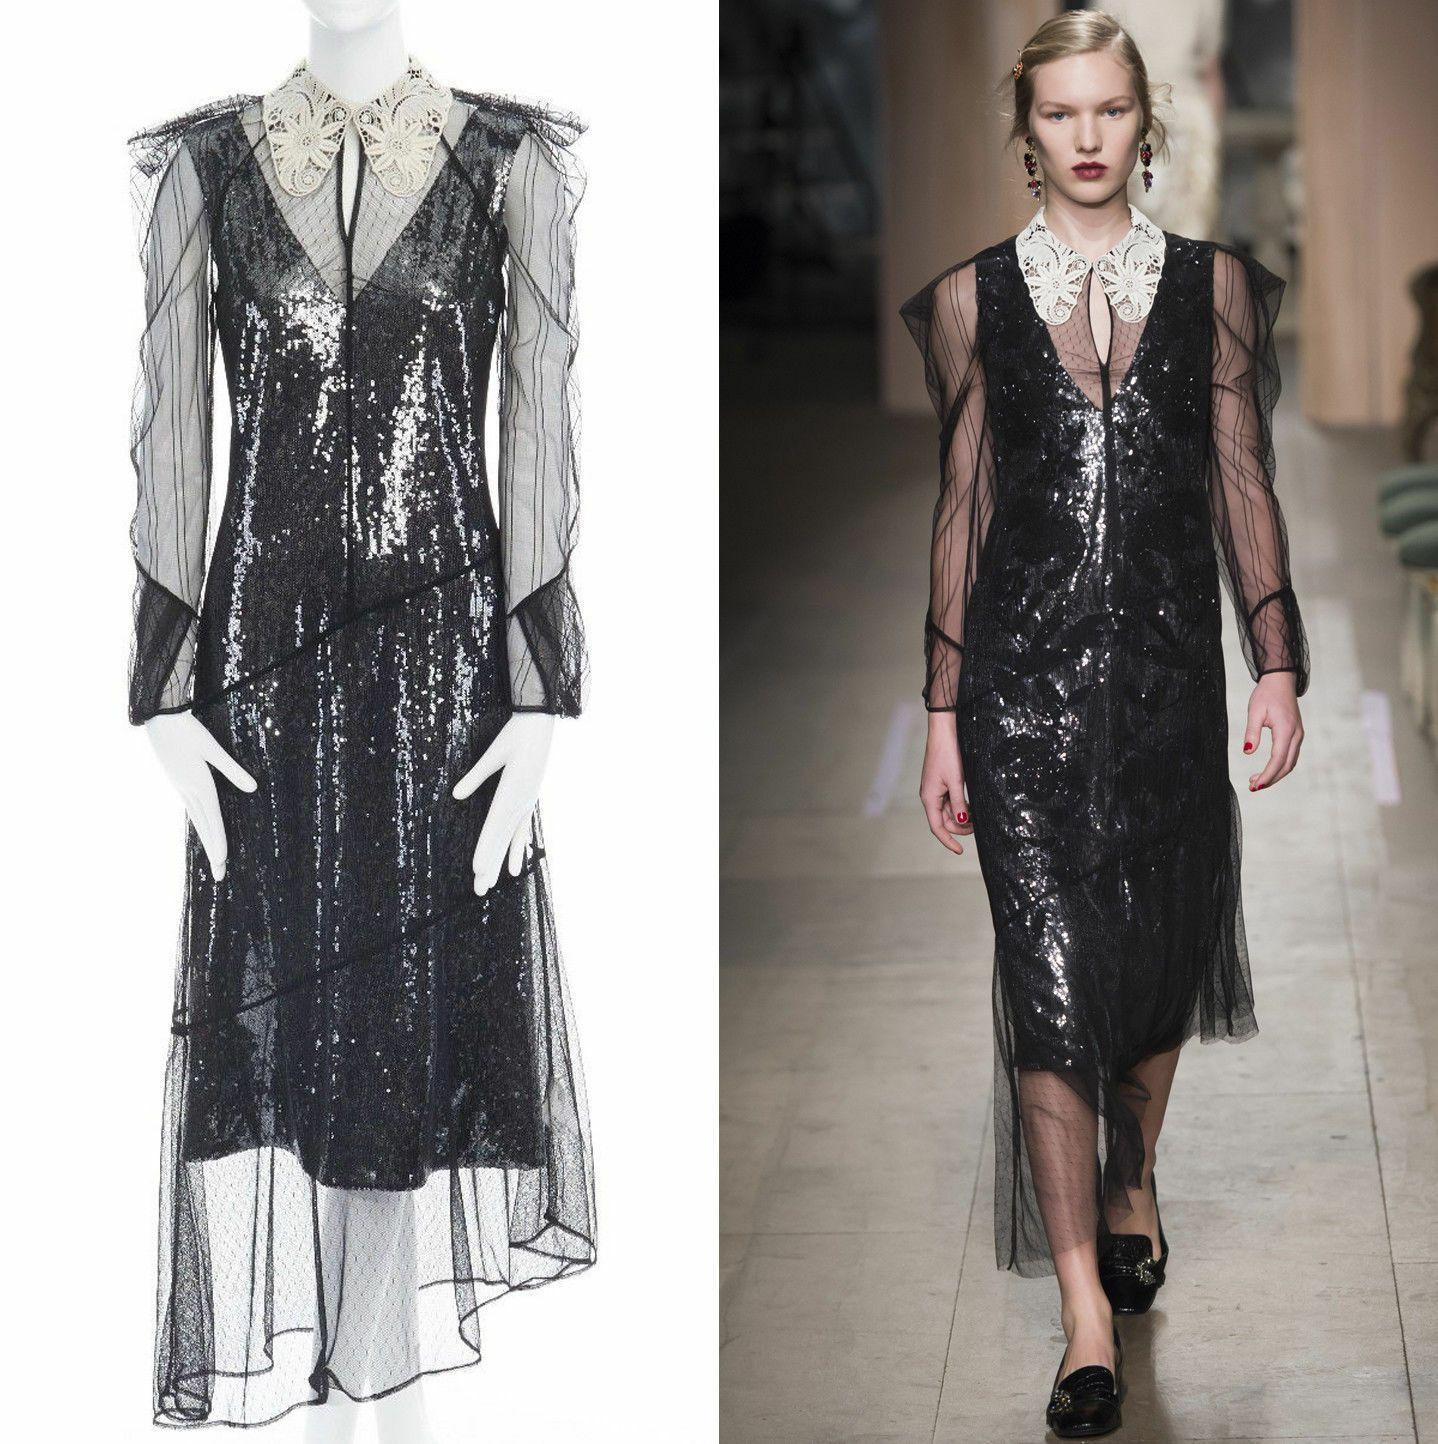 new ERDEM Runway AW16 silver sequins lined lace collar puff shoulder dress US6 S

ERDEM
FROM THE FALL WINTER 2016 RUNWAYSilver sequins slip dress lining. Black mesh sheer outer. Cream lace oversized collar. Puff shoulder. Long sleeve. Diagonal